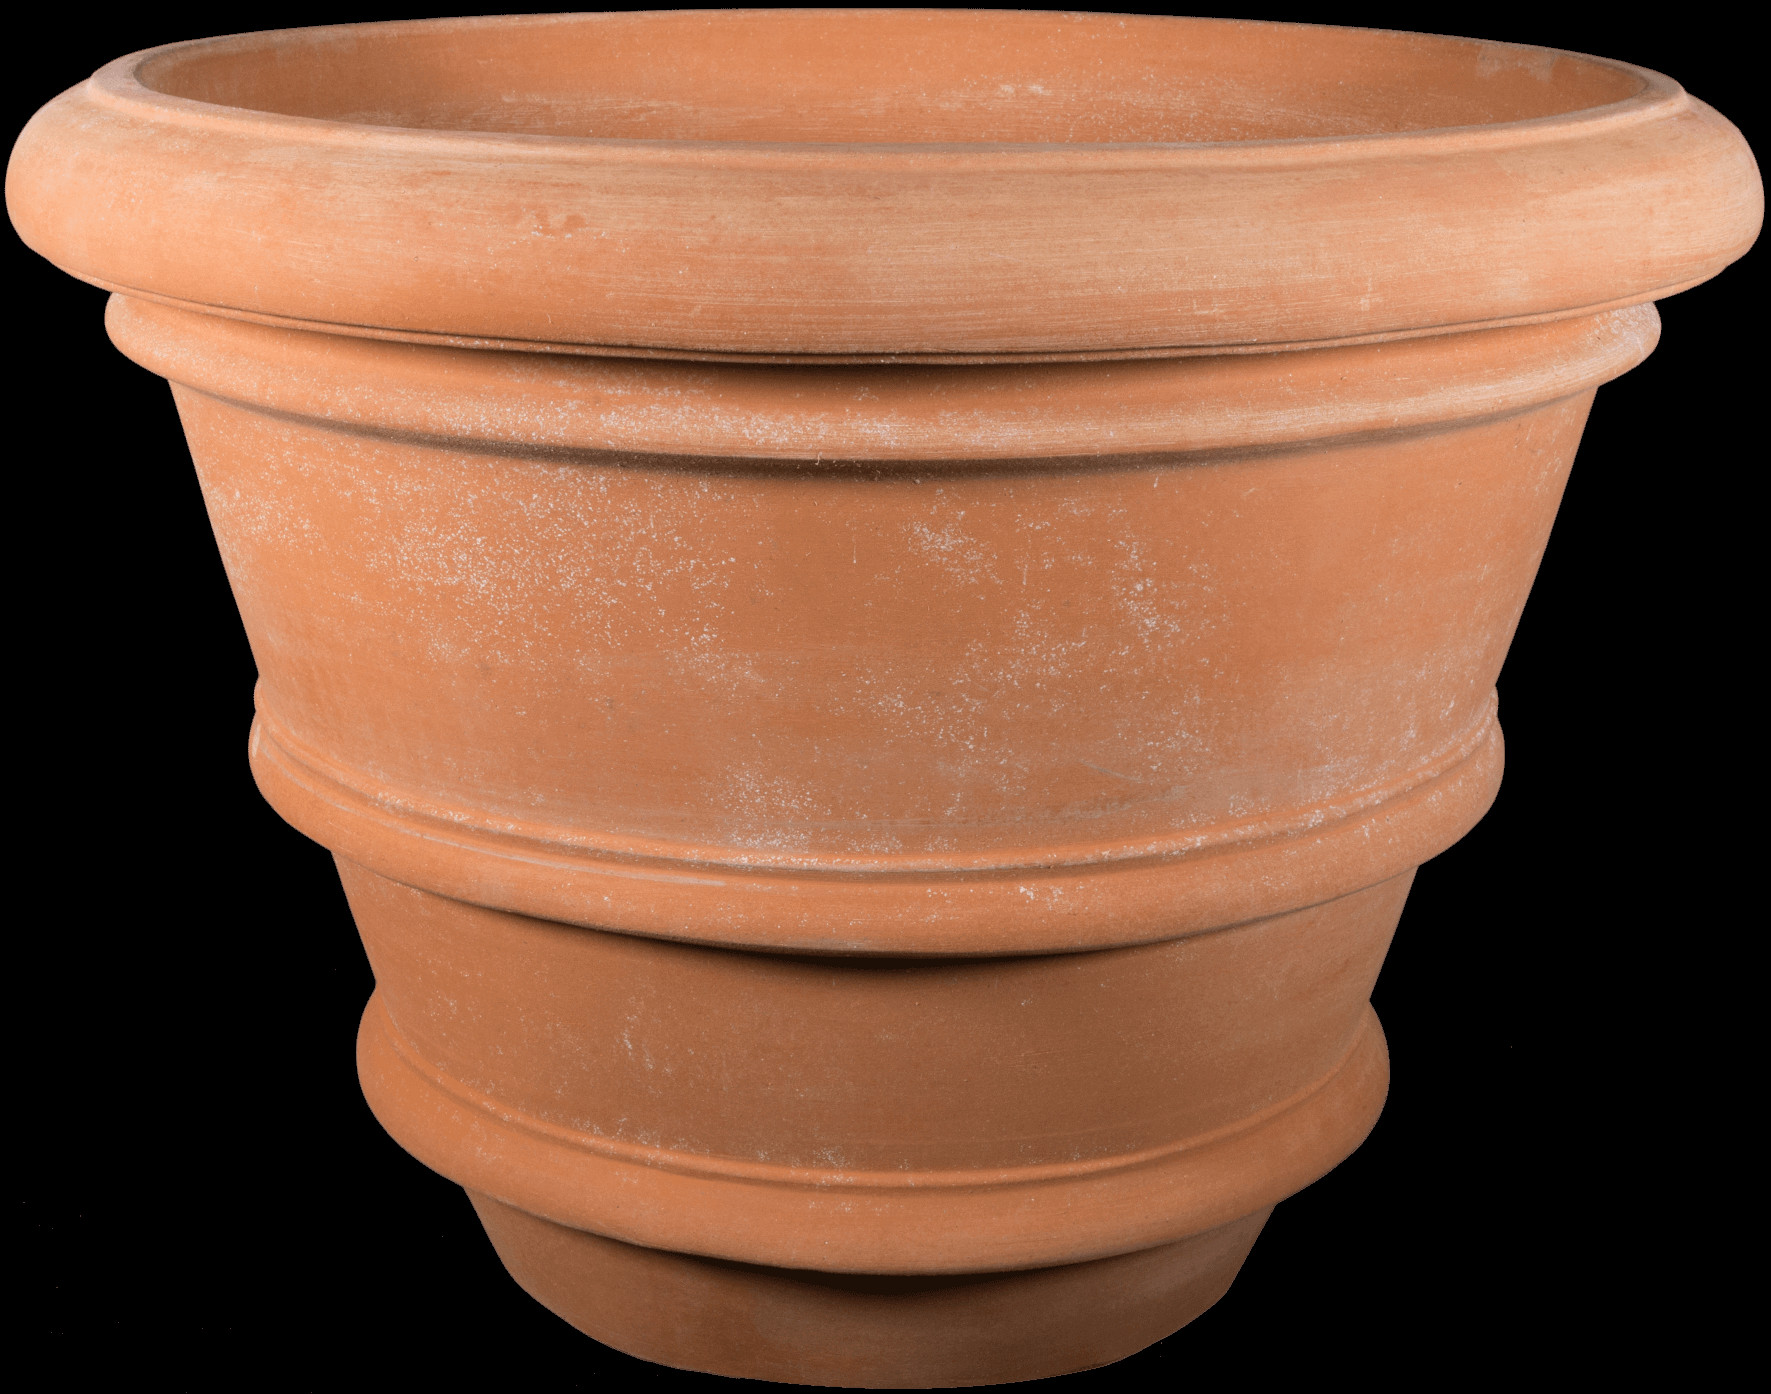 17 Ideal 24 Inch Square Vase 2024 free download 24 inch square vase of terracotta vases for sale from impruneta tuscan imports within 310